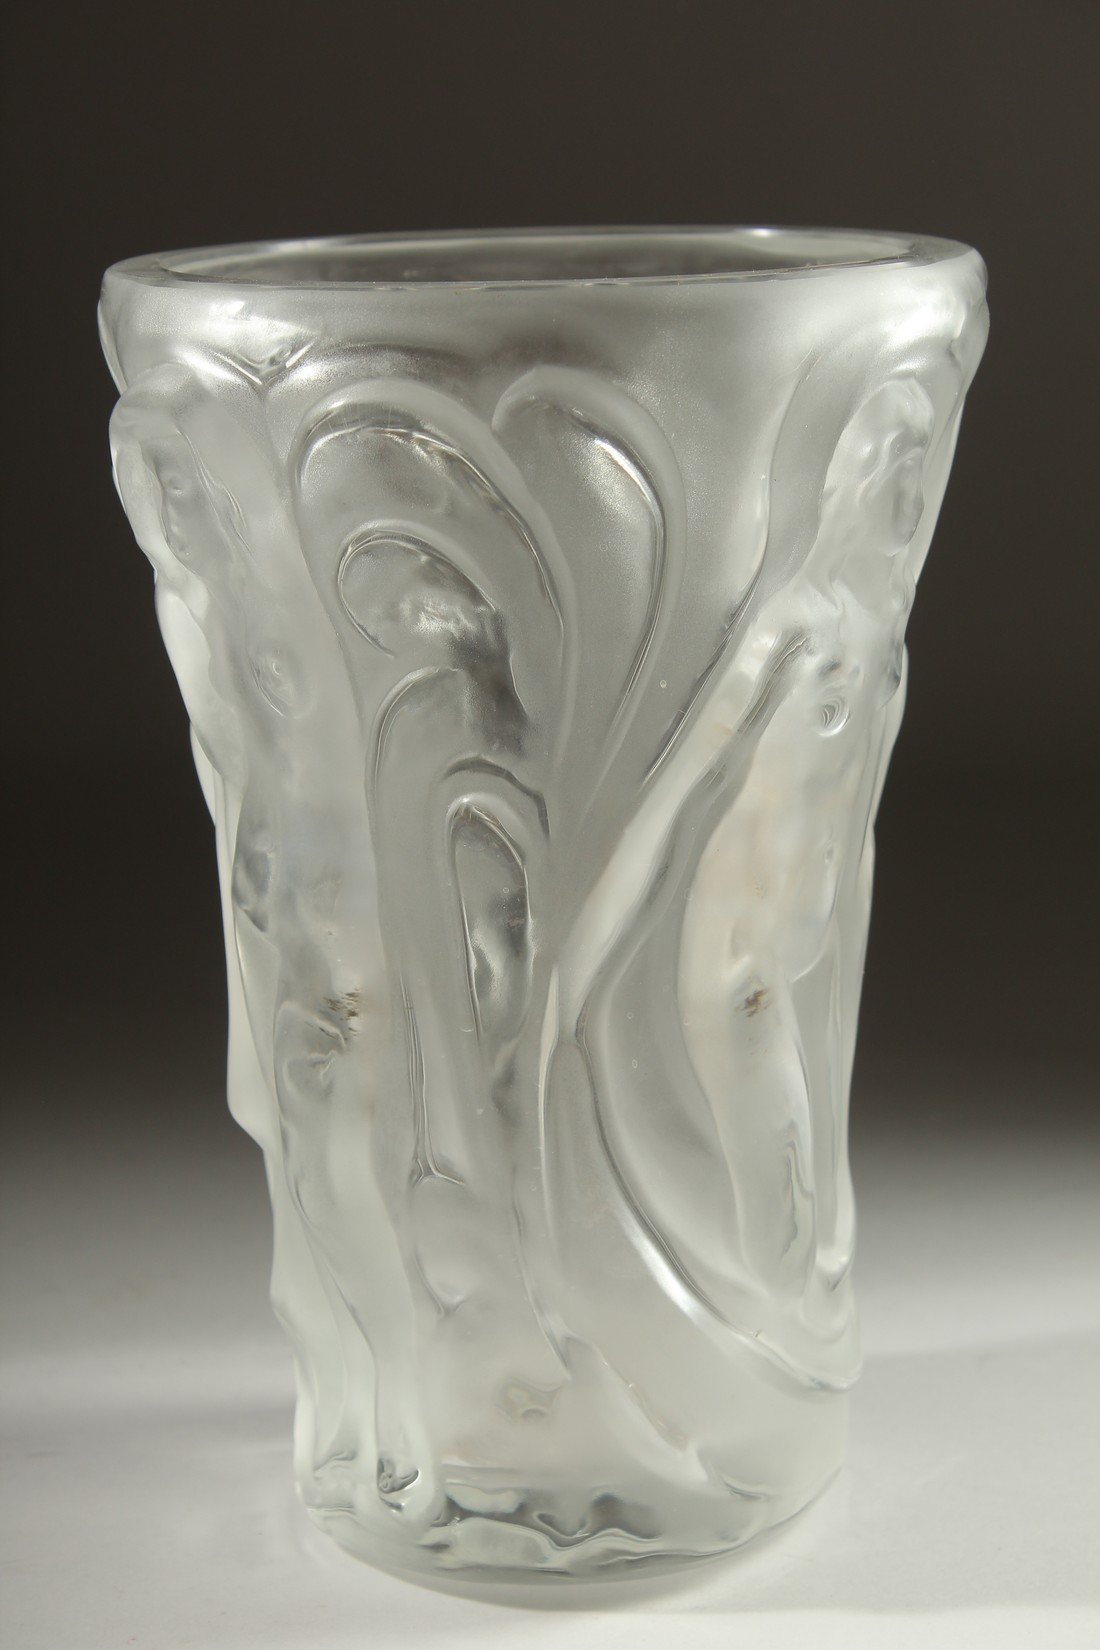 A GOOD LALIQUE FROSTED GLASS VASE the sides with nudes. Engraved: Lalique,France. 8.5ins high. - Image 3 of 6